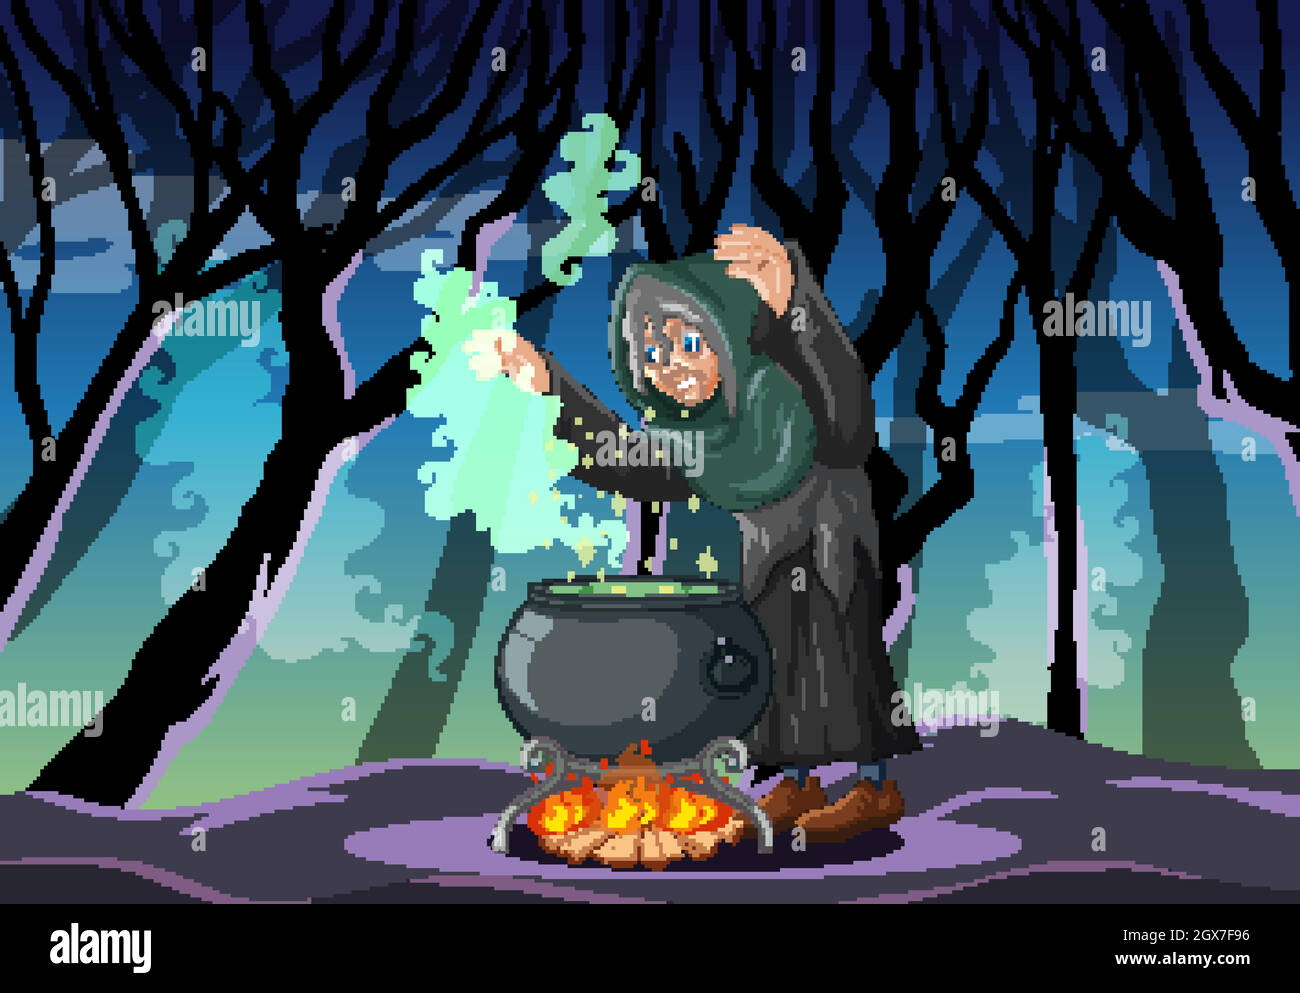 Wizard or witch with magic pot on dark forest scene Stock Vector